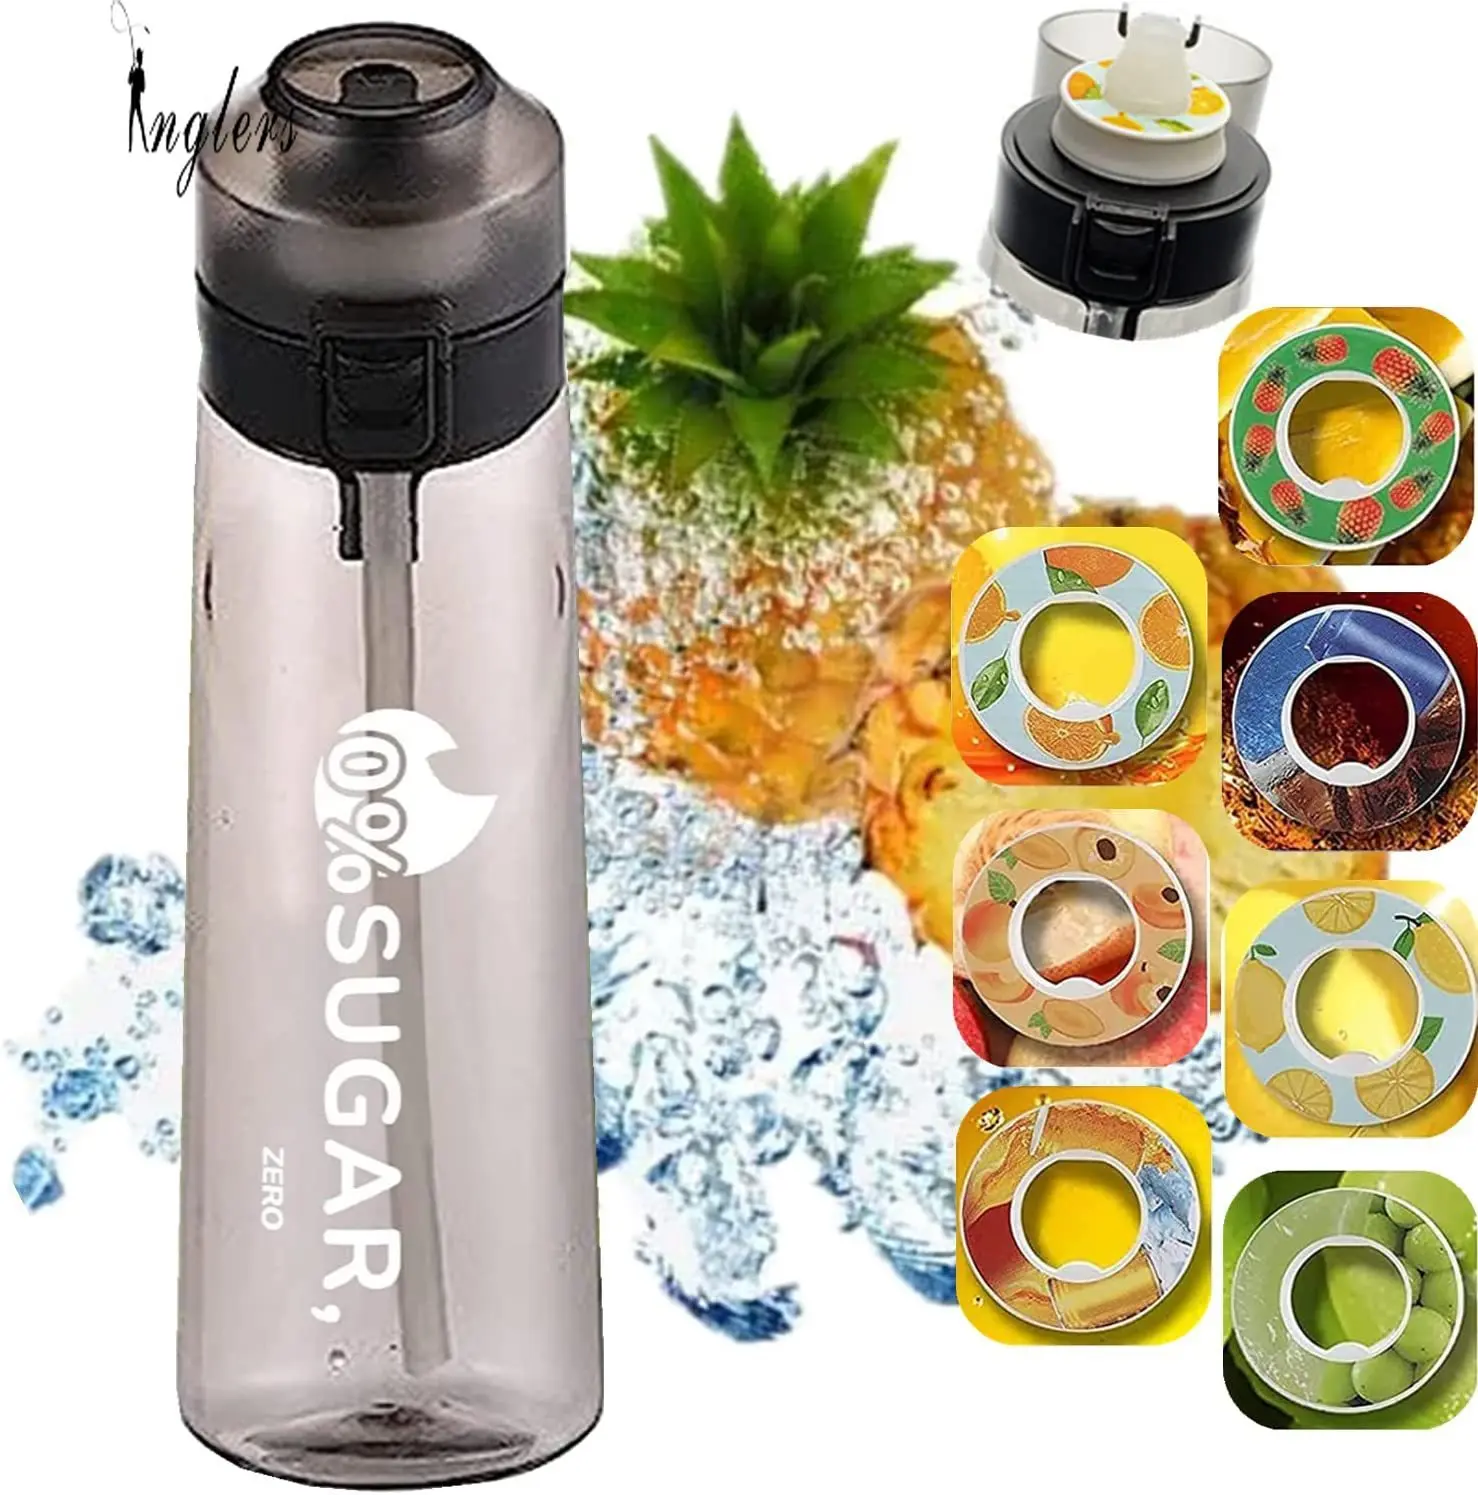 

Fashion Water Cup With Straw Flavor Pods Air Up Flavored Water Bottle Scent Water Cup Sports Water Bottle For Outdoor Fitness